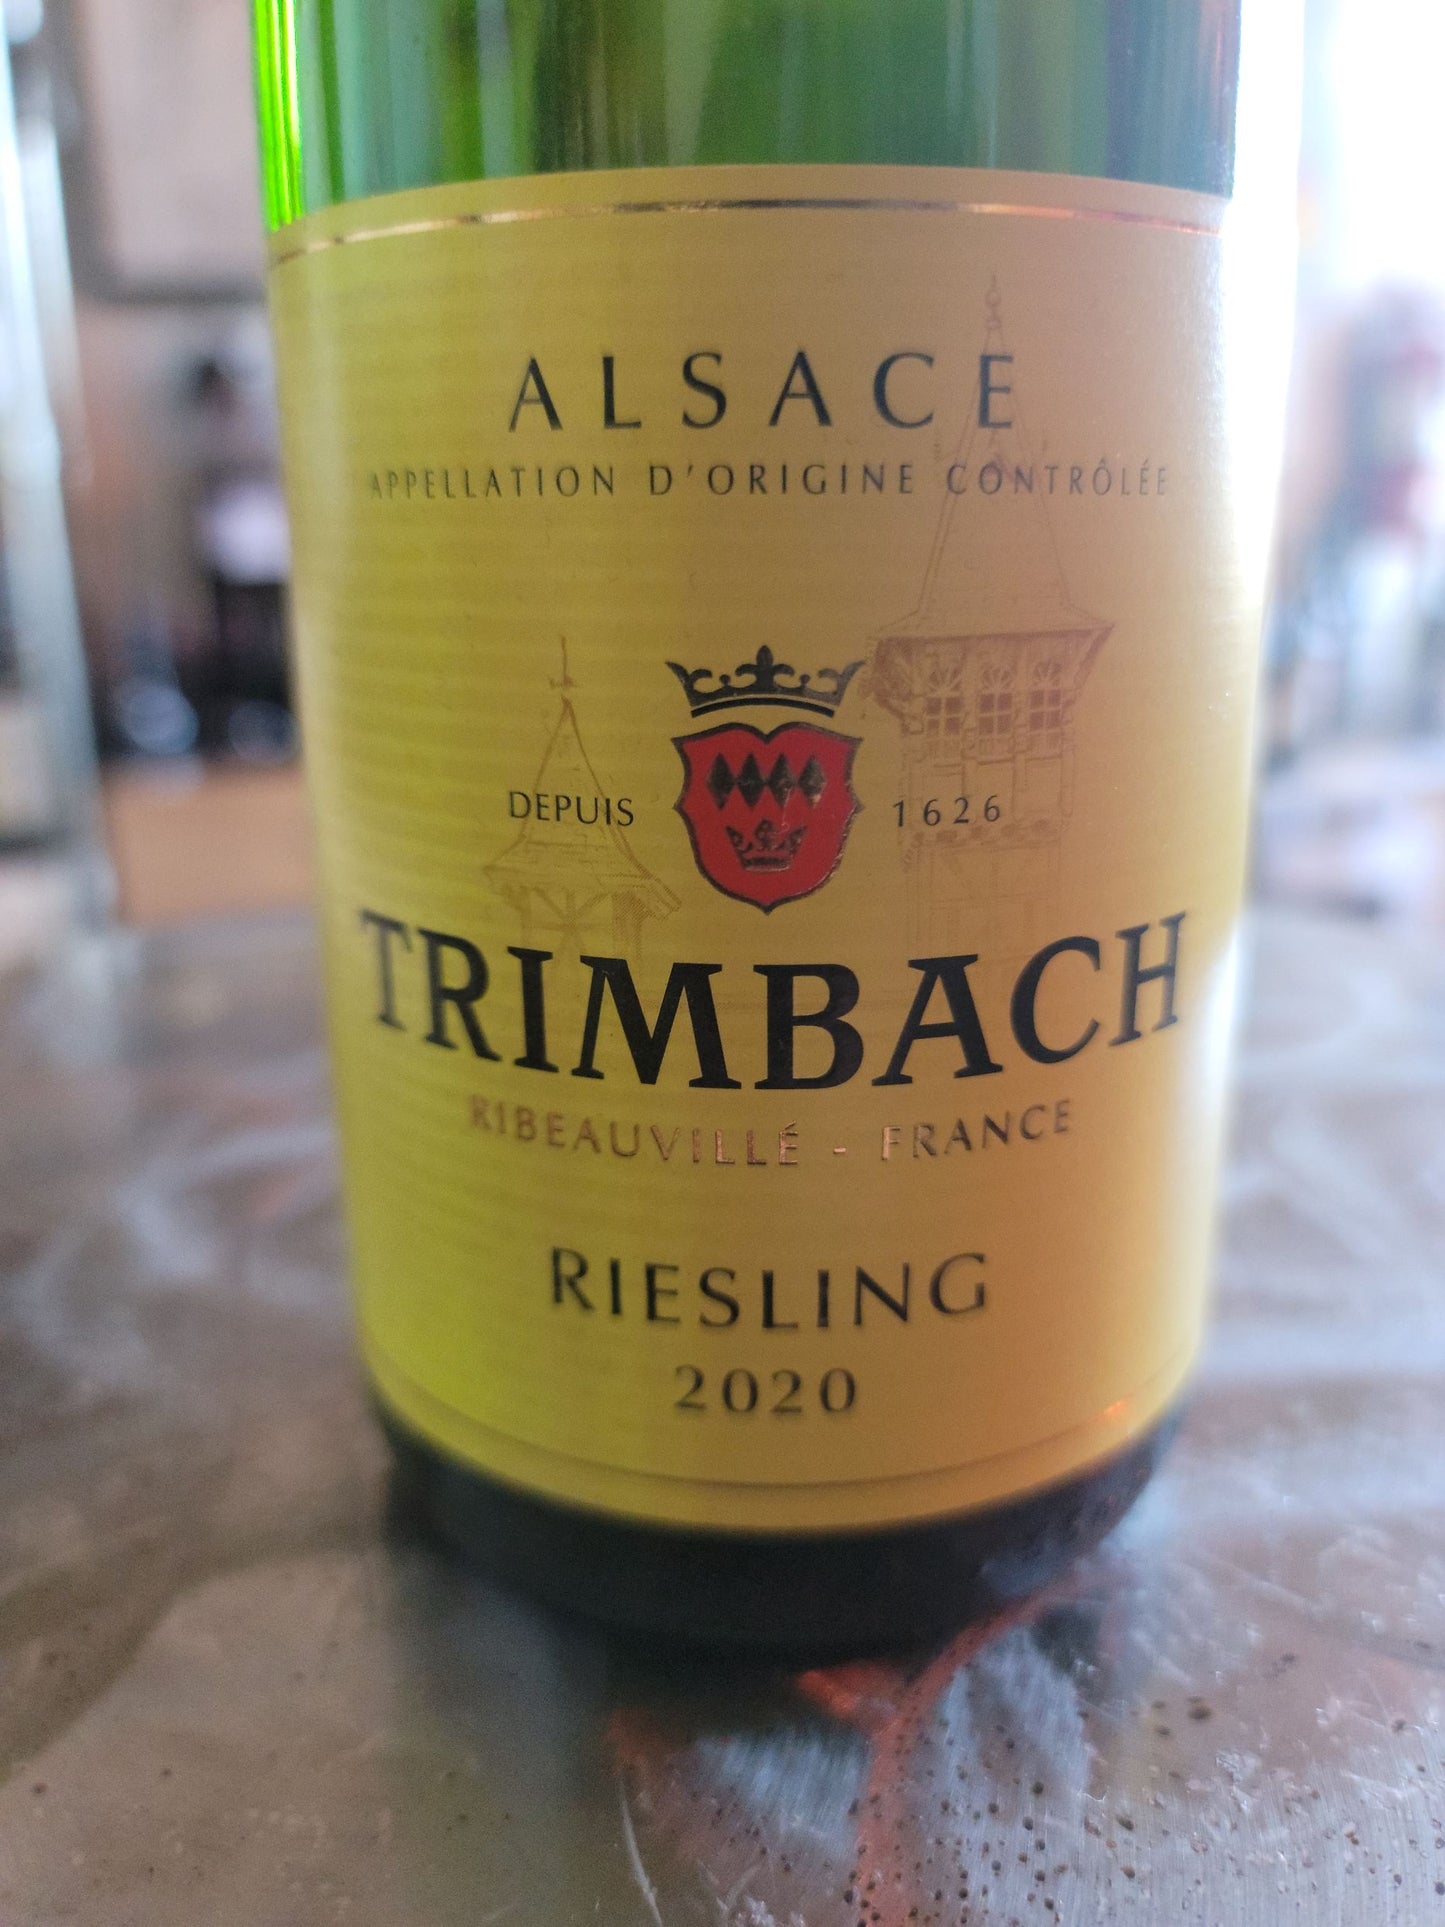 TRIMBACH 2020 Riesling (Alsace, France)